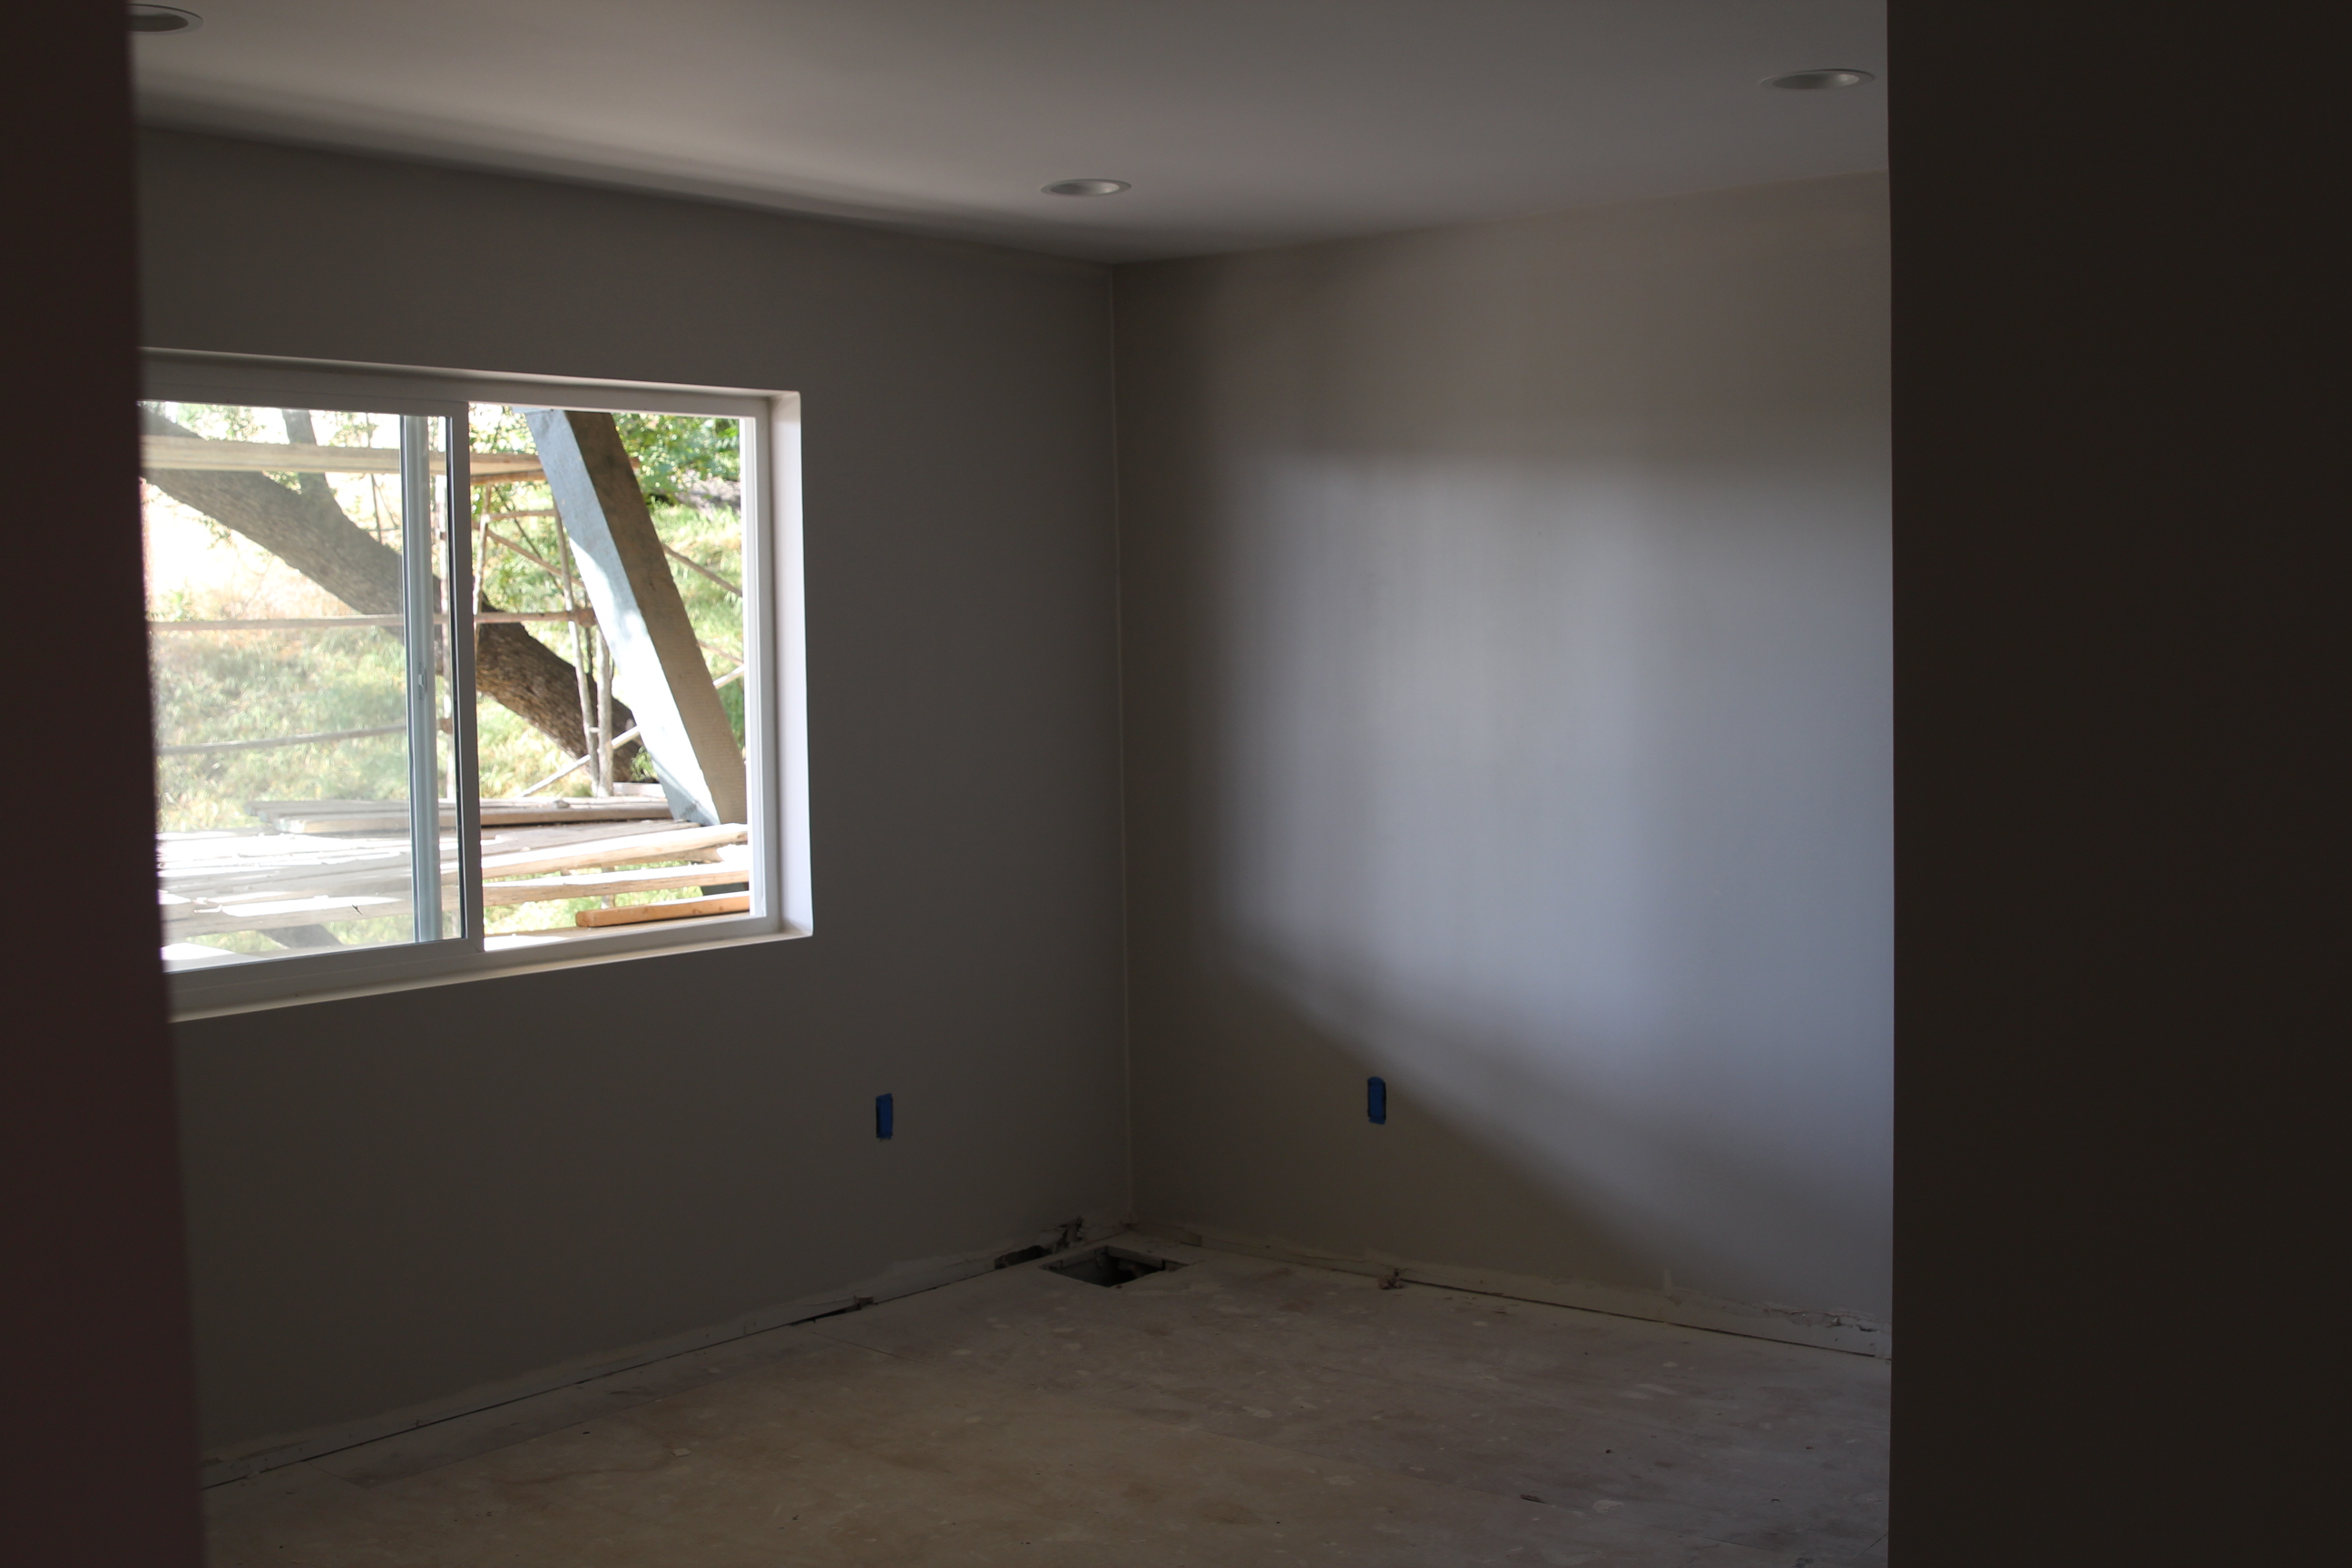 Home Remodel: Walls, Floors and Lighting